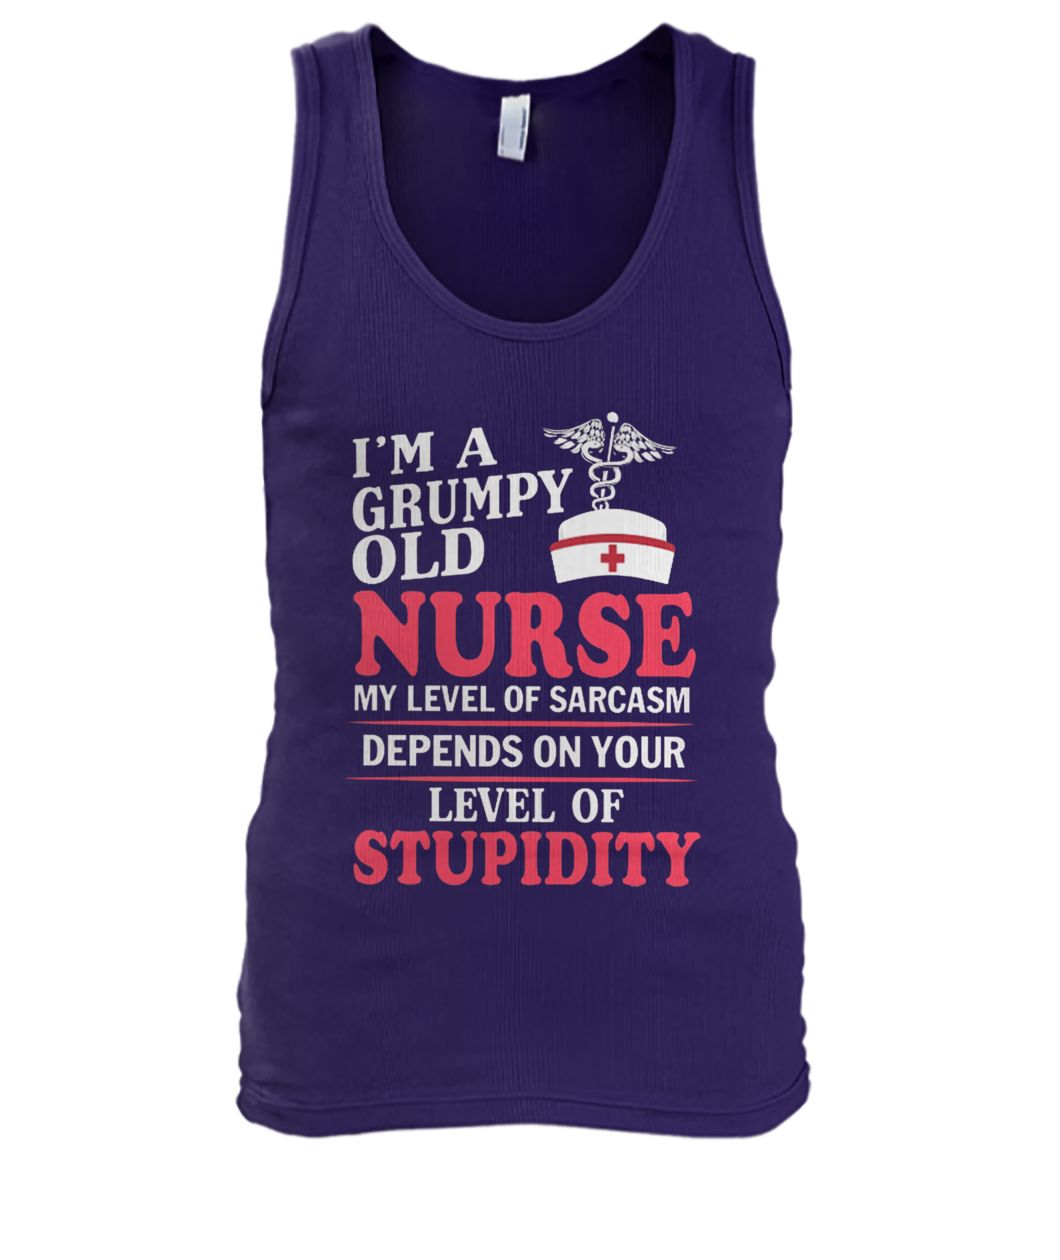 I’m a grumpy old nurse my level of sarcasm depends on your level of stupidity men's tank top